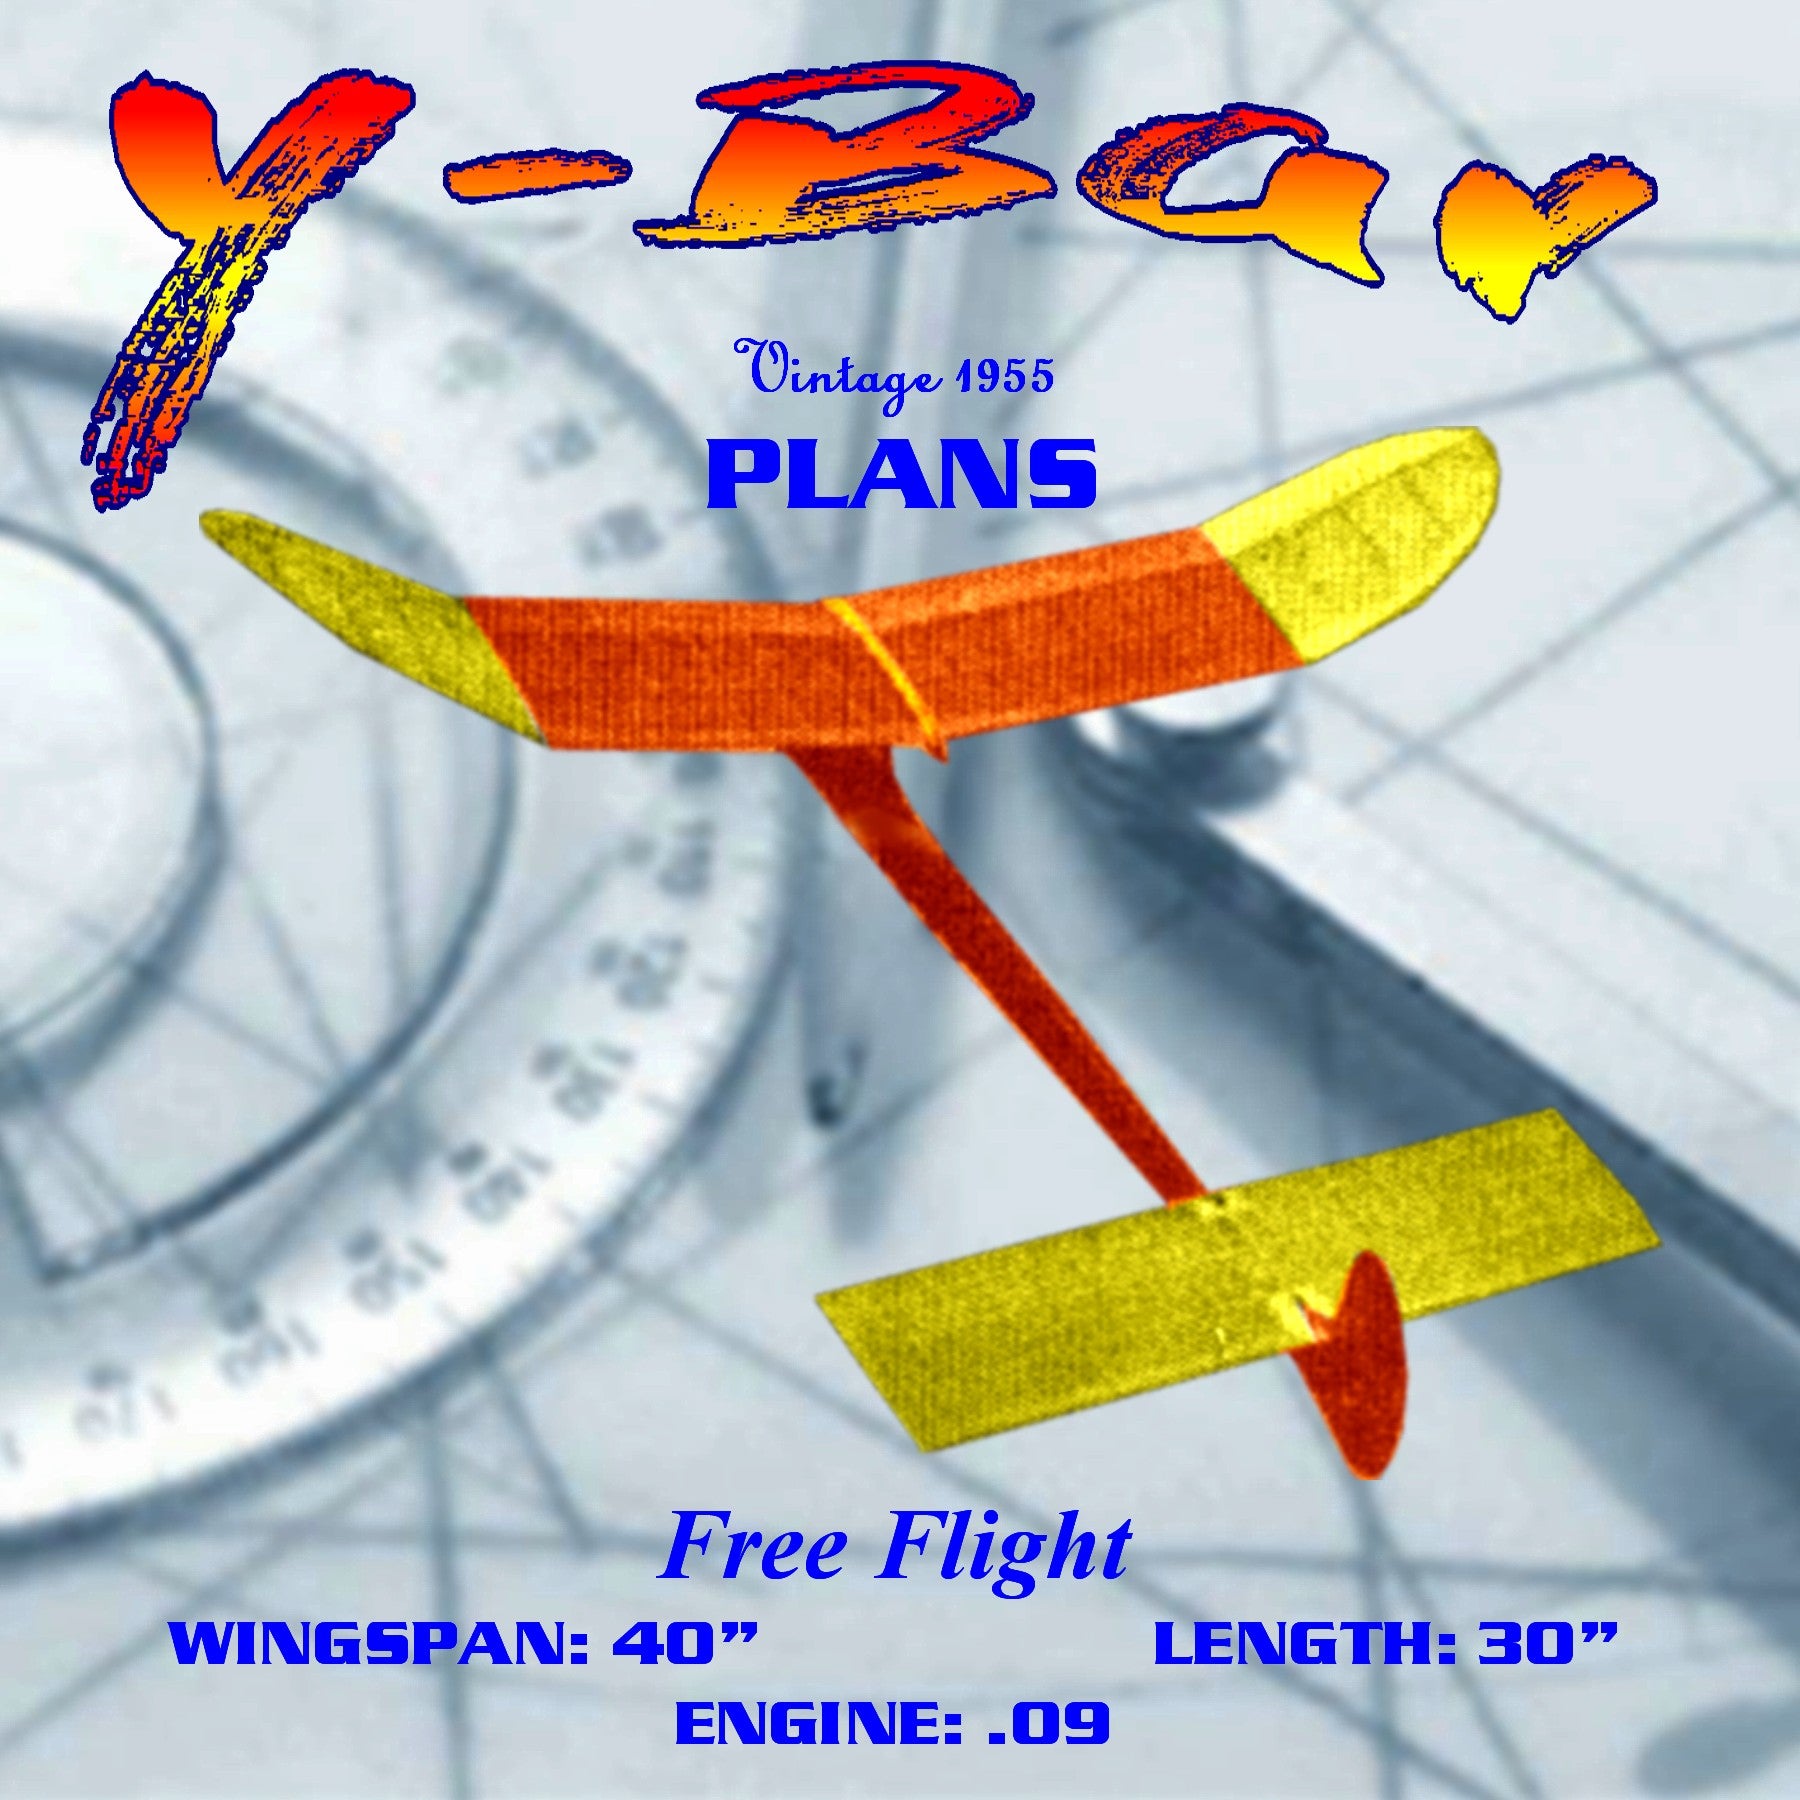 full size printed plan vintage 1955 free flight the y-bar wingspan 40”  engine .09 contest design